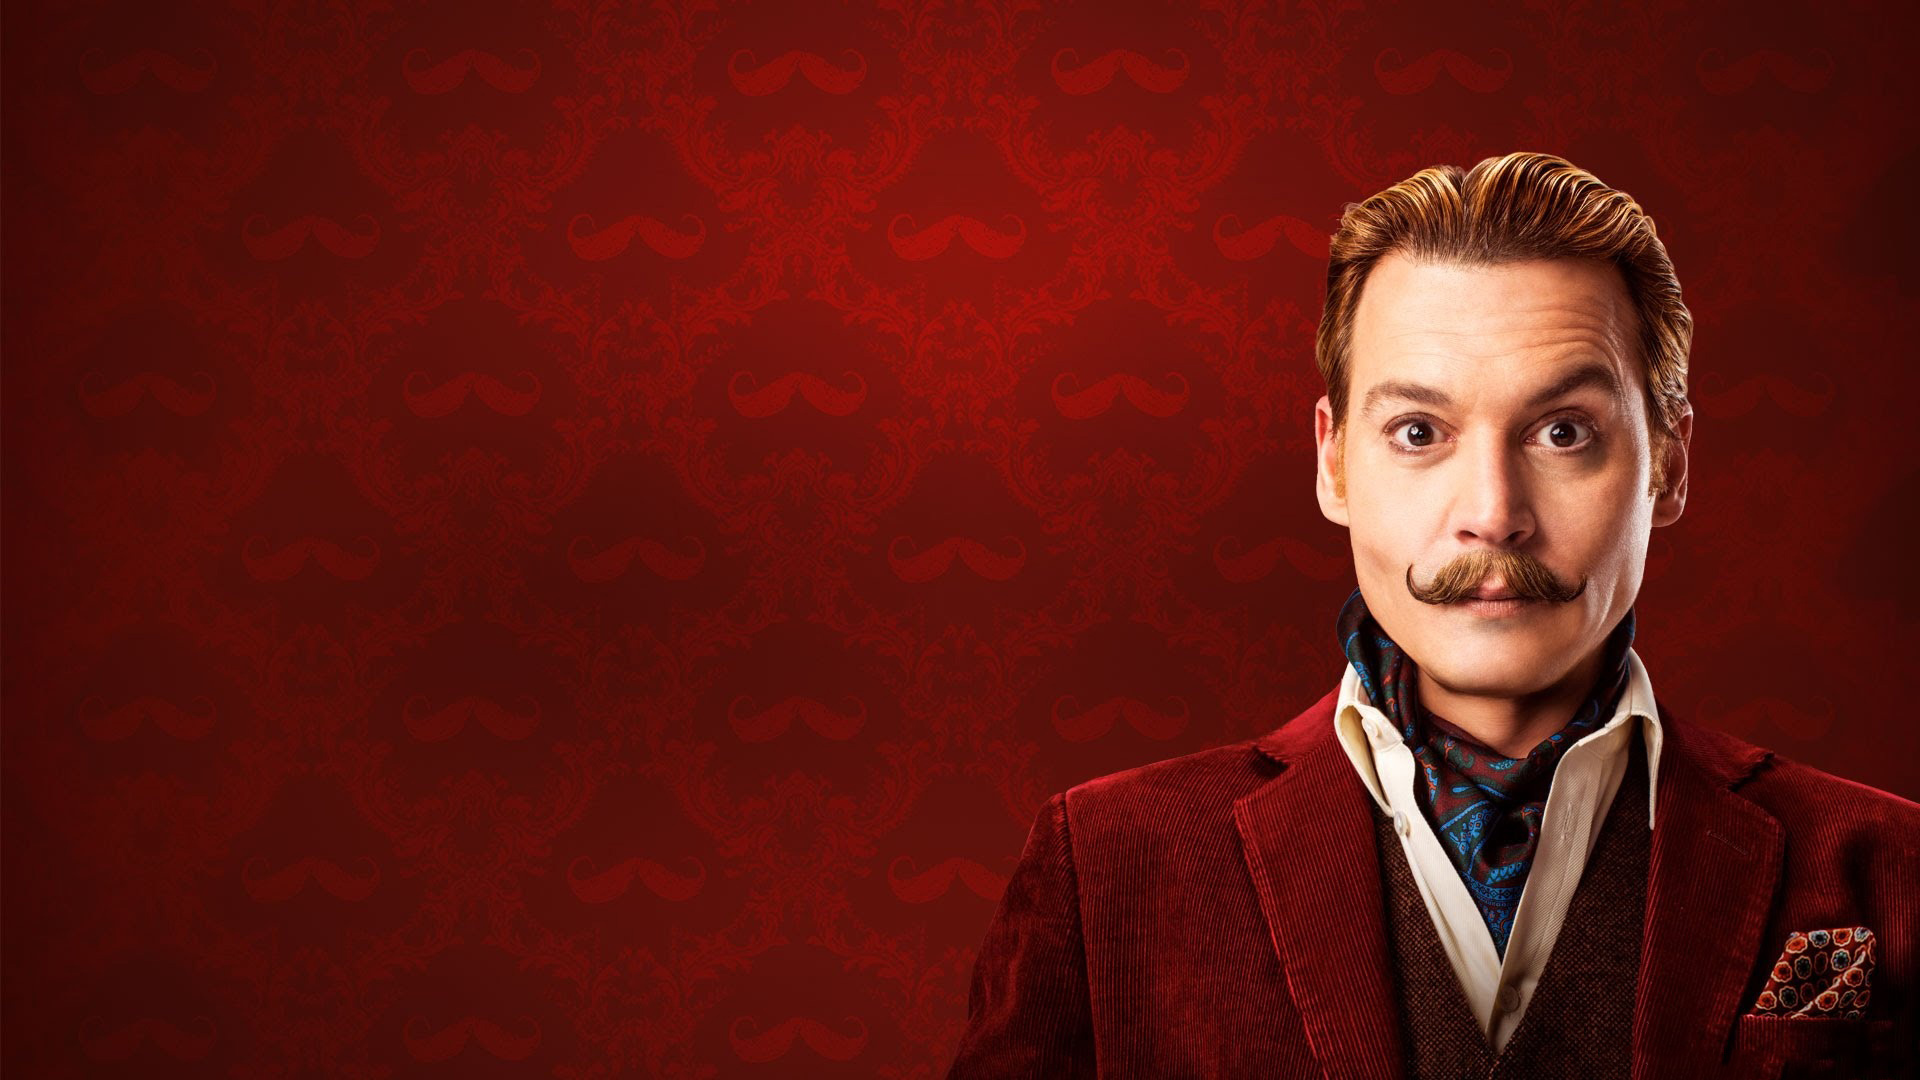 Johnny Depp Wallpaper High Resolution And Quality